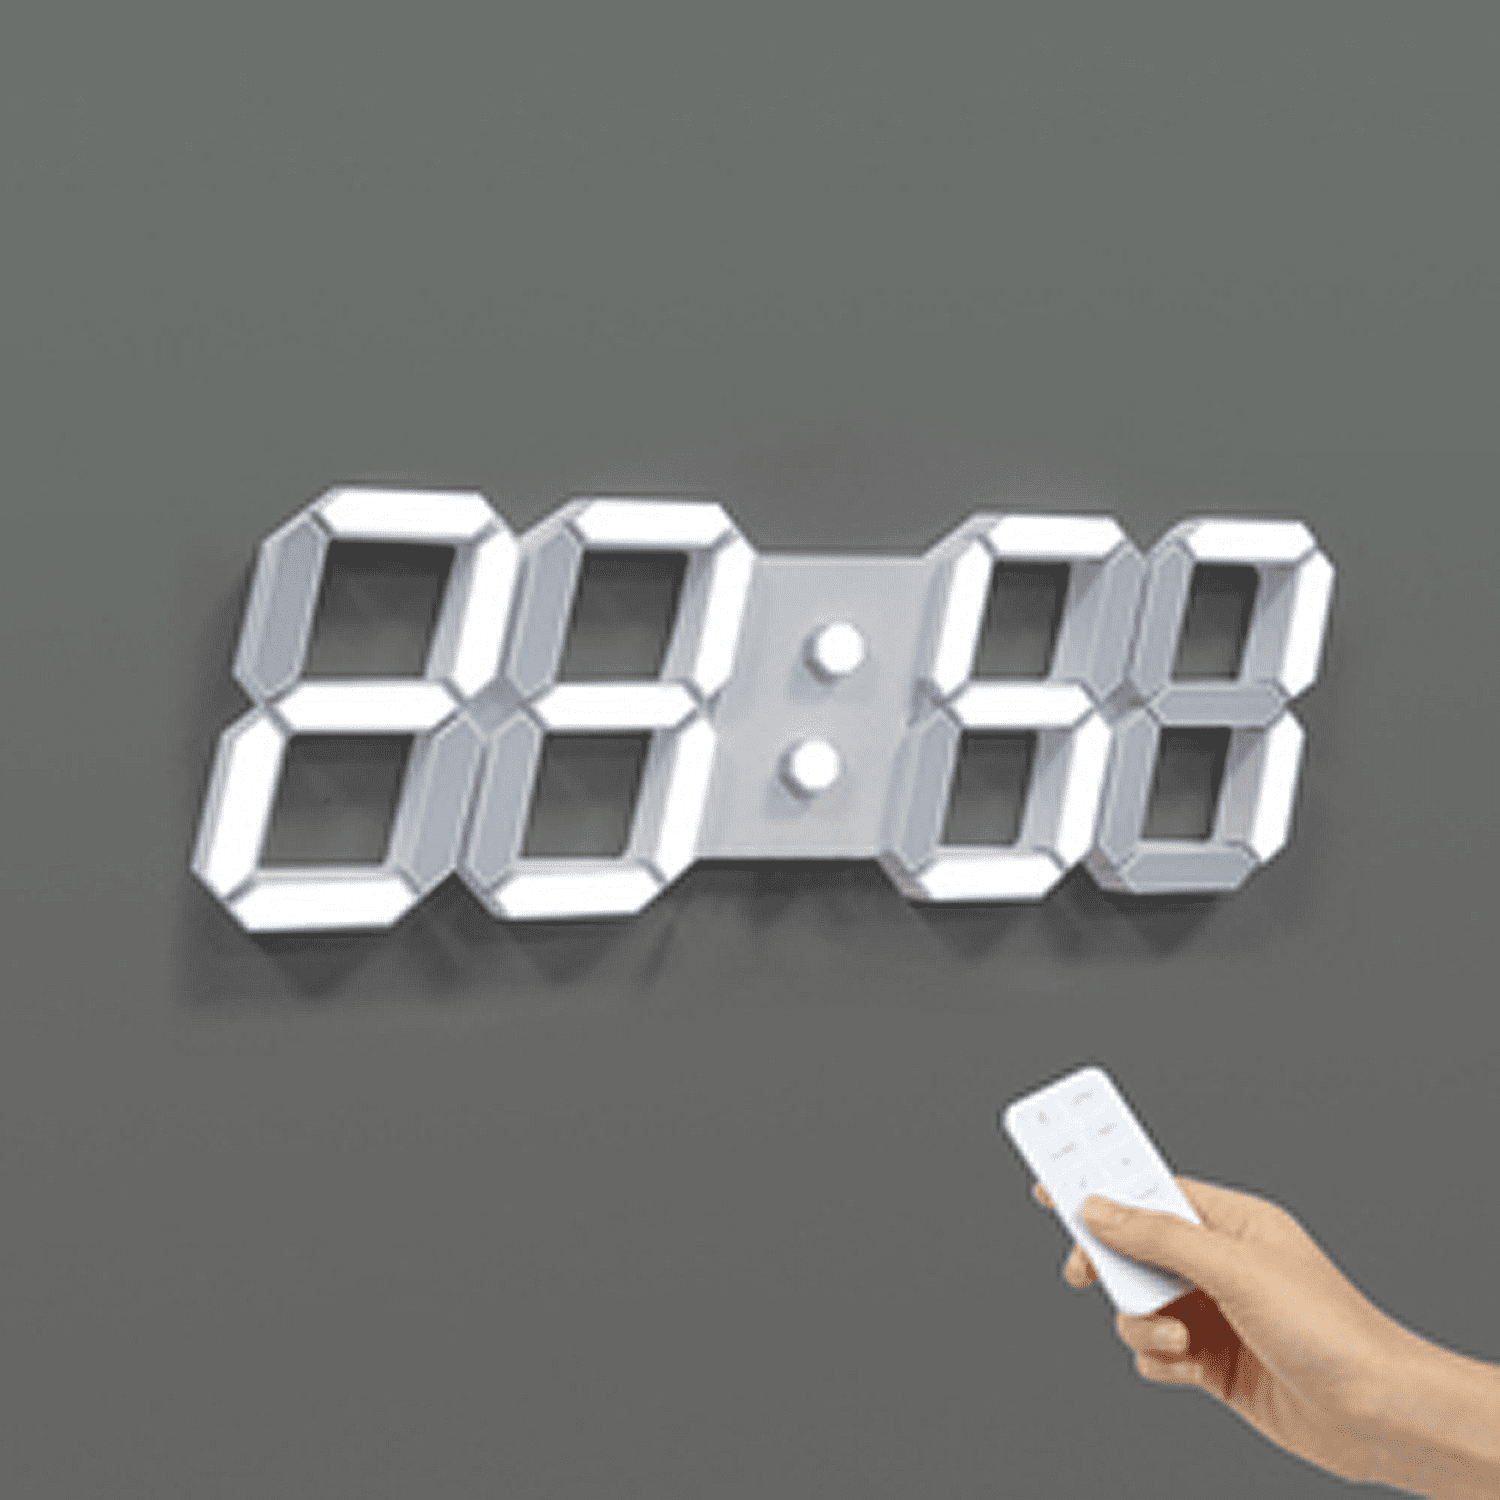 Multi Function LED Wall Clock with Remote Control 15"